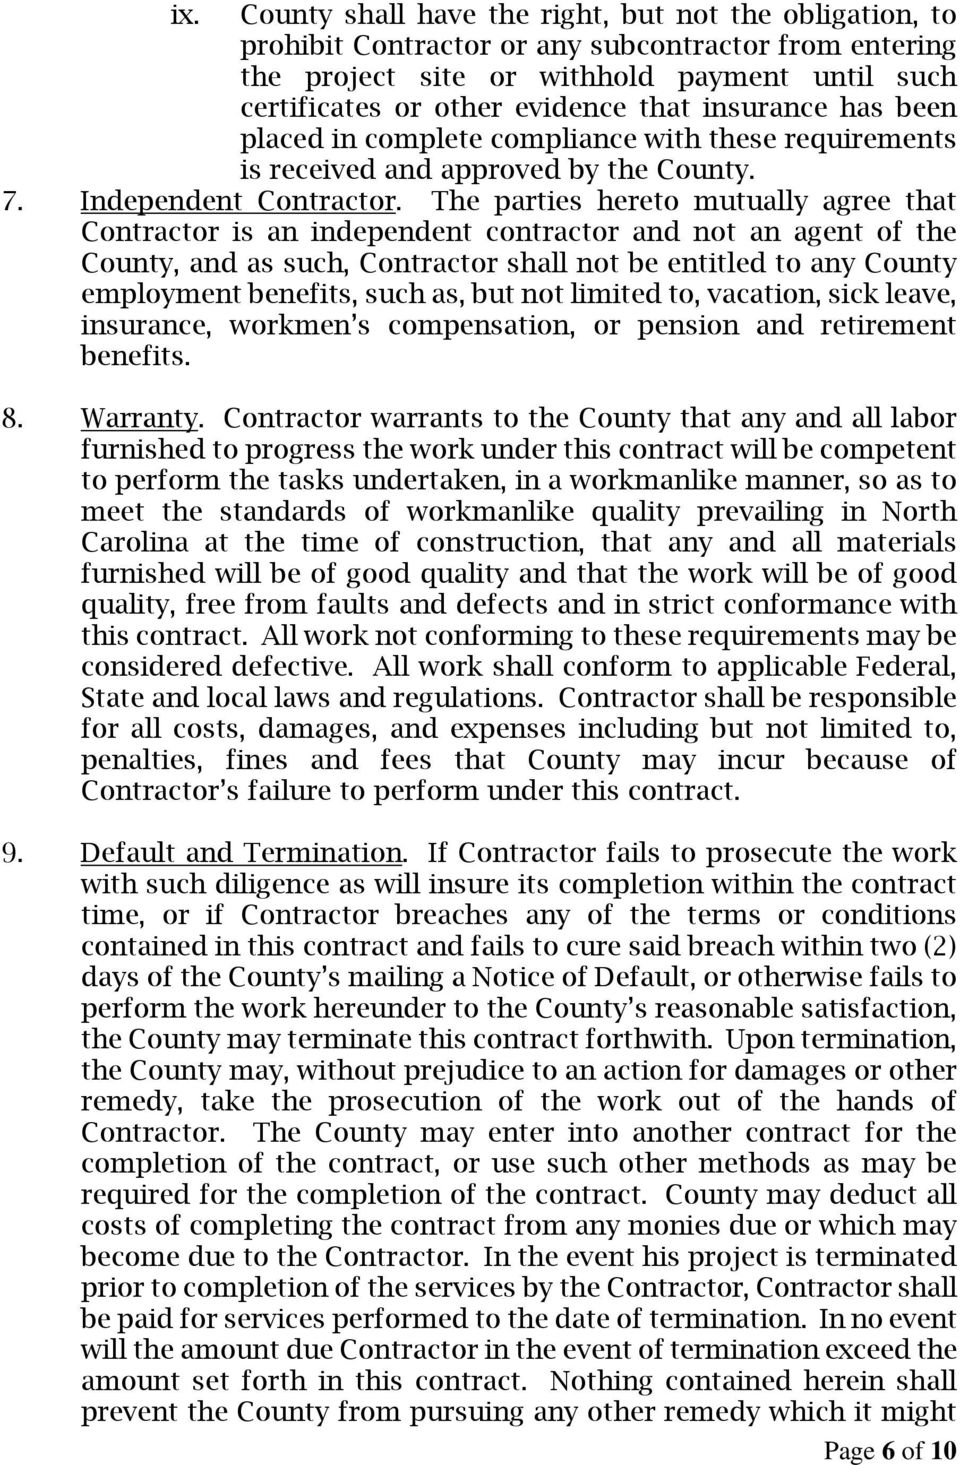 The parties hereto mutually agree that Contractor is an independent contractor and not an agent of the County, and as such, Contractor shall not be entitled to any County employment benefits, such